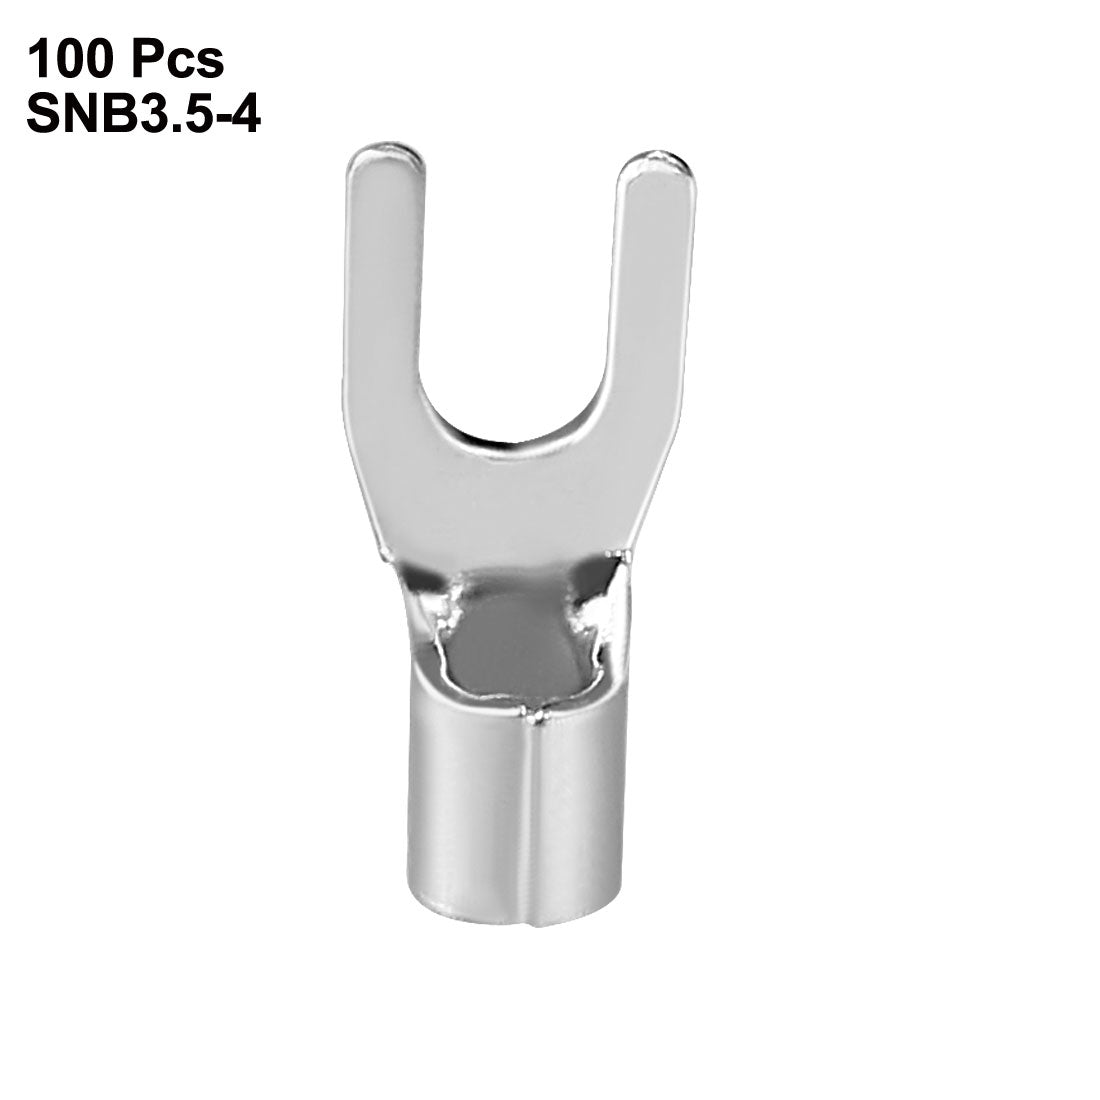 uxcell Uxcell 100x Fork Type Copper Non-Insulated Spade Terminals SNB3.5-4, 14-12 Wire Size, #6 Stud Size